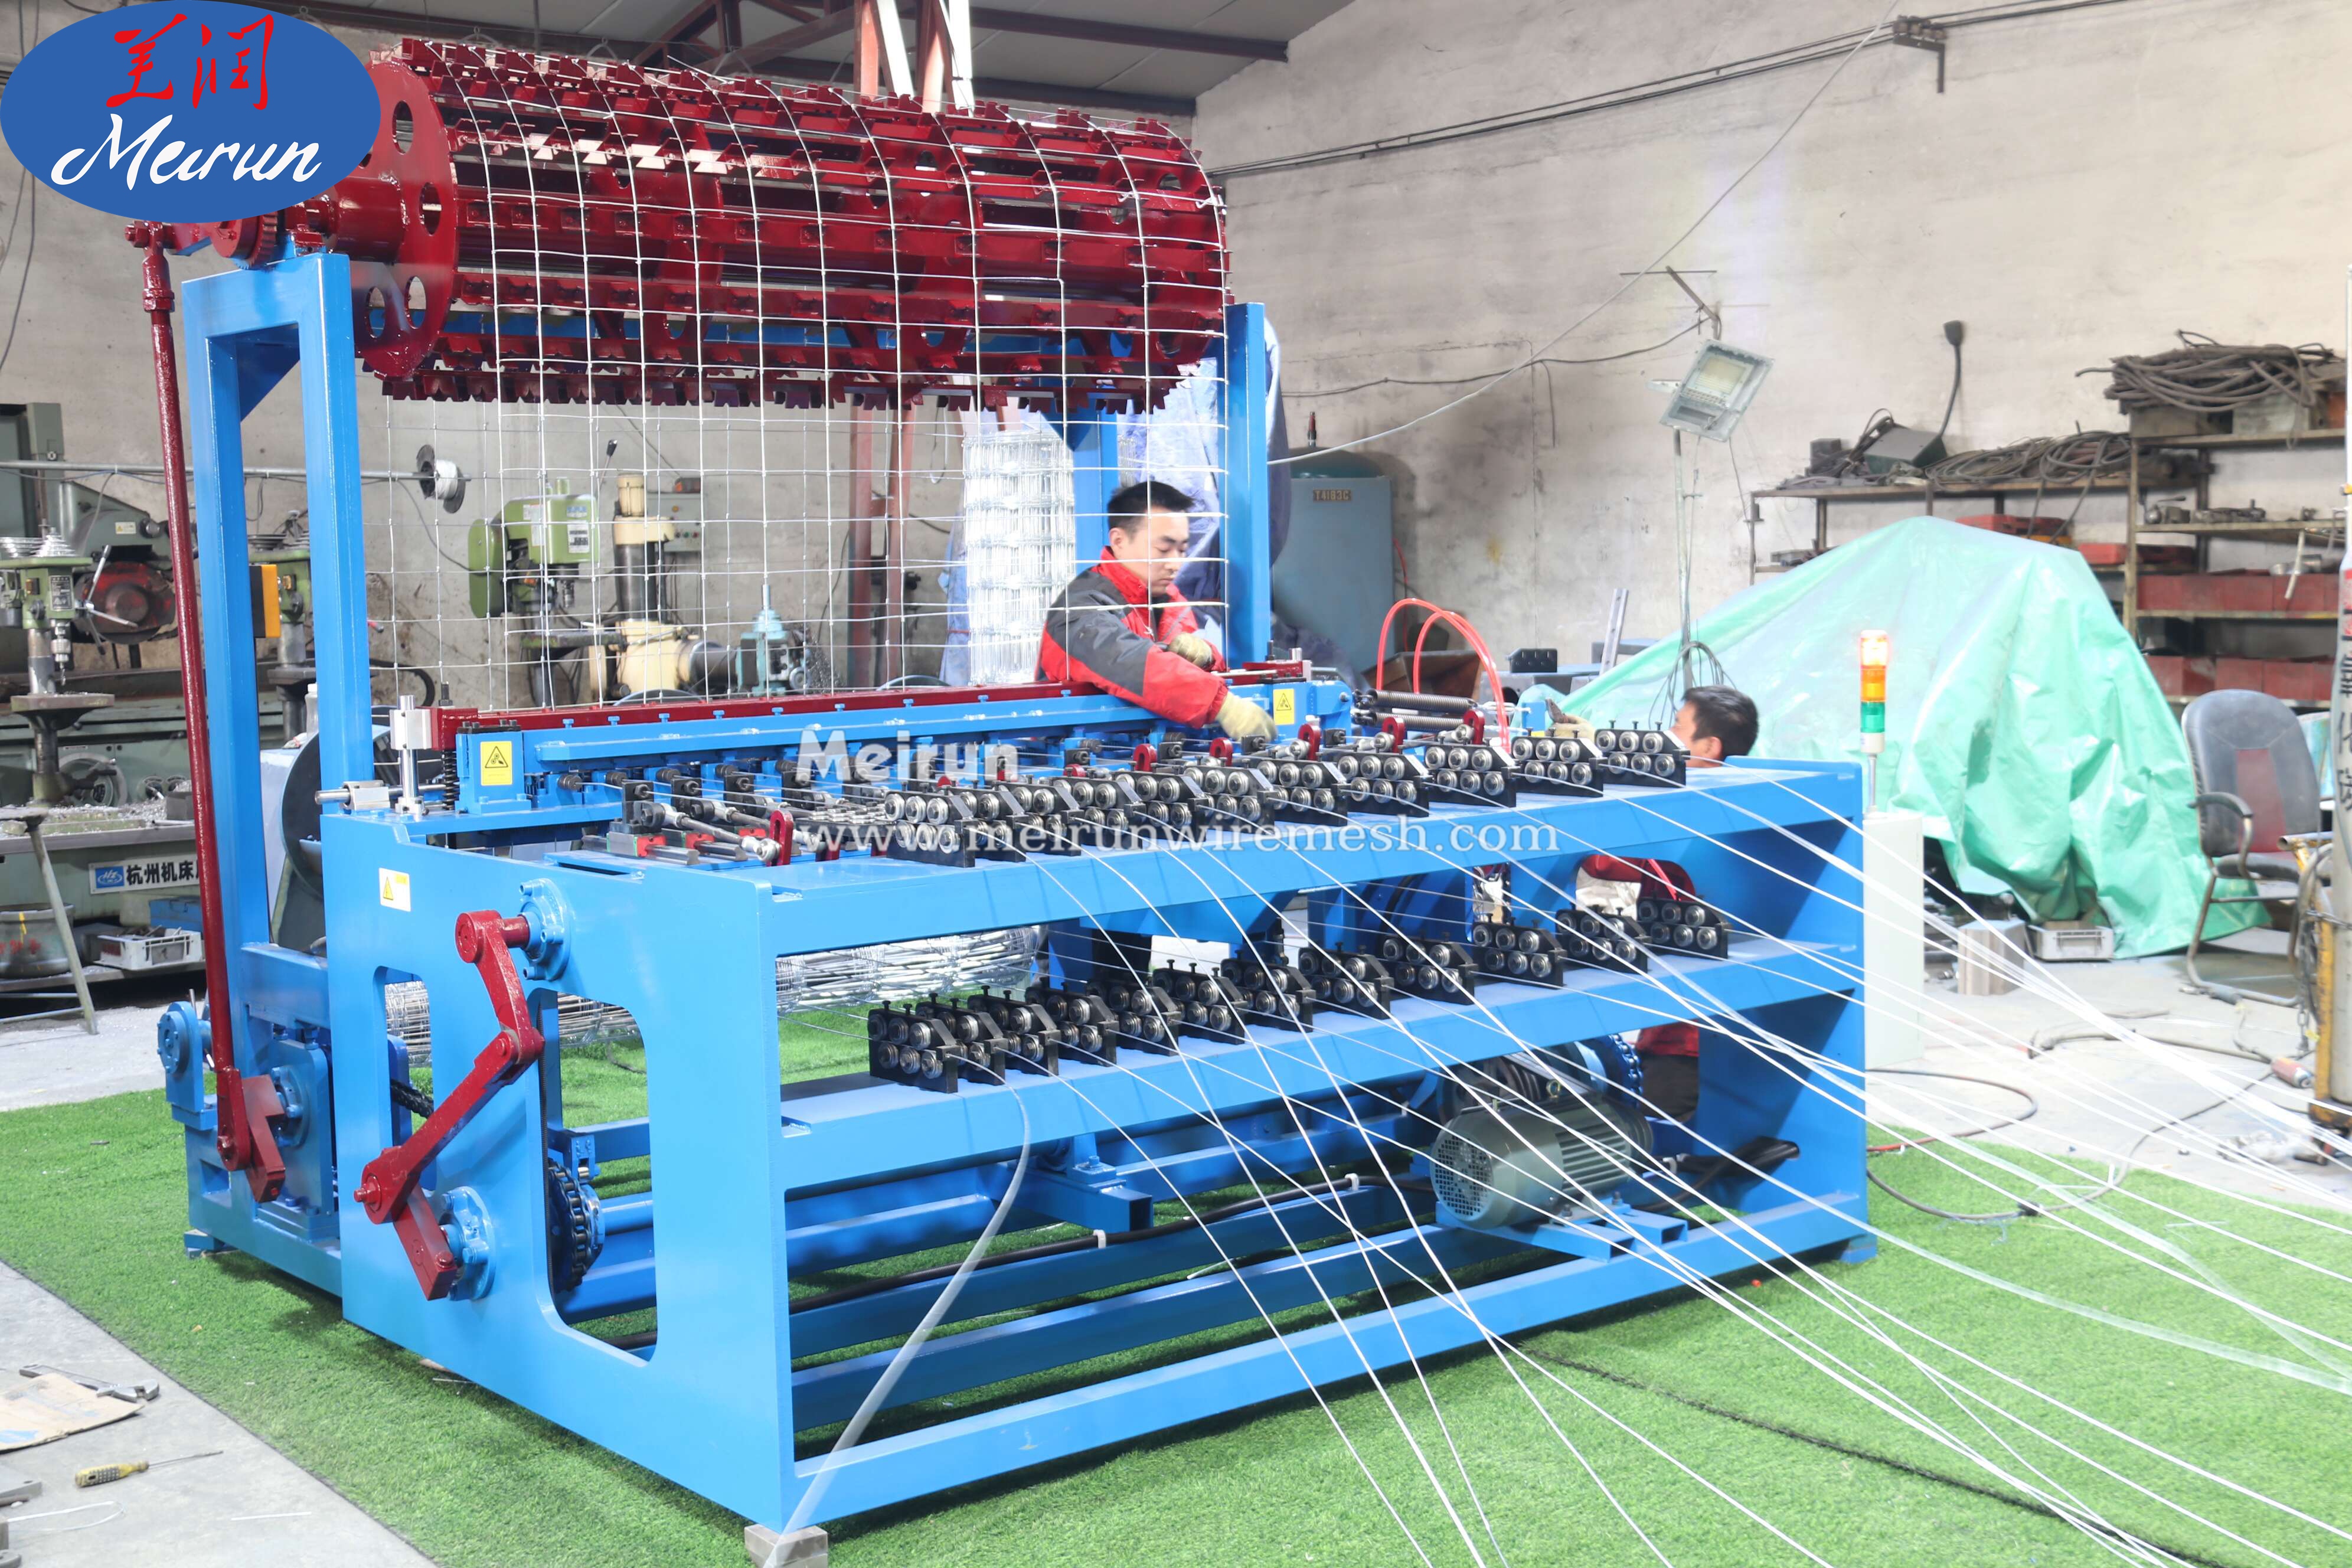 Hot Selling Grassland Fence Netting Machine for Making Cattle